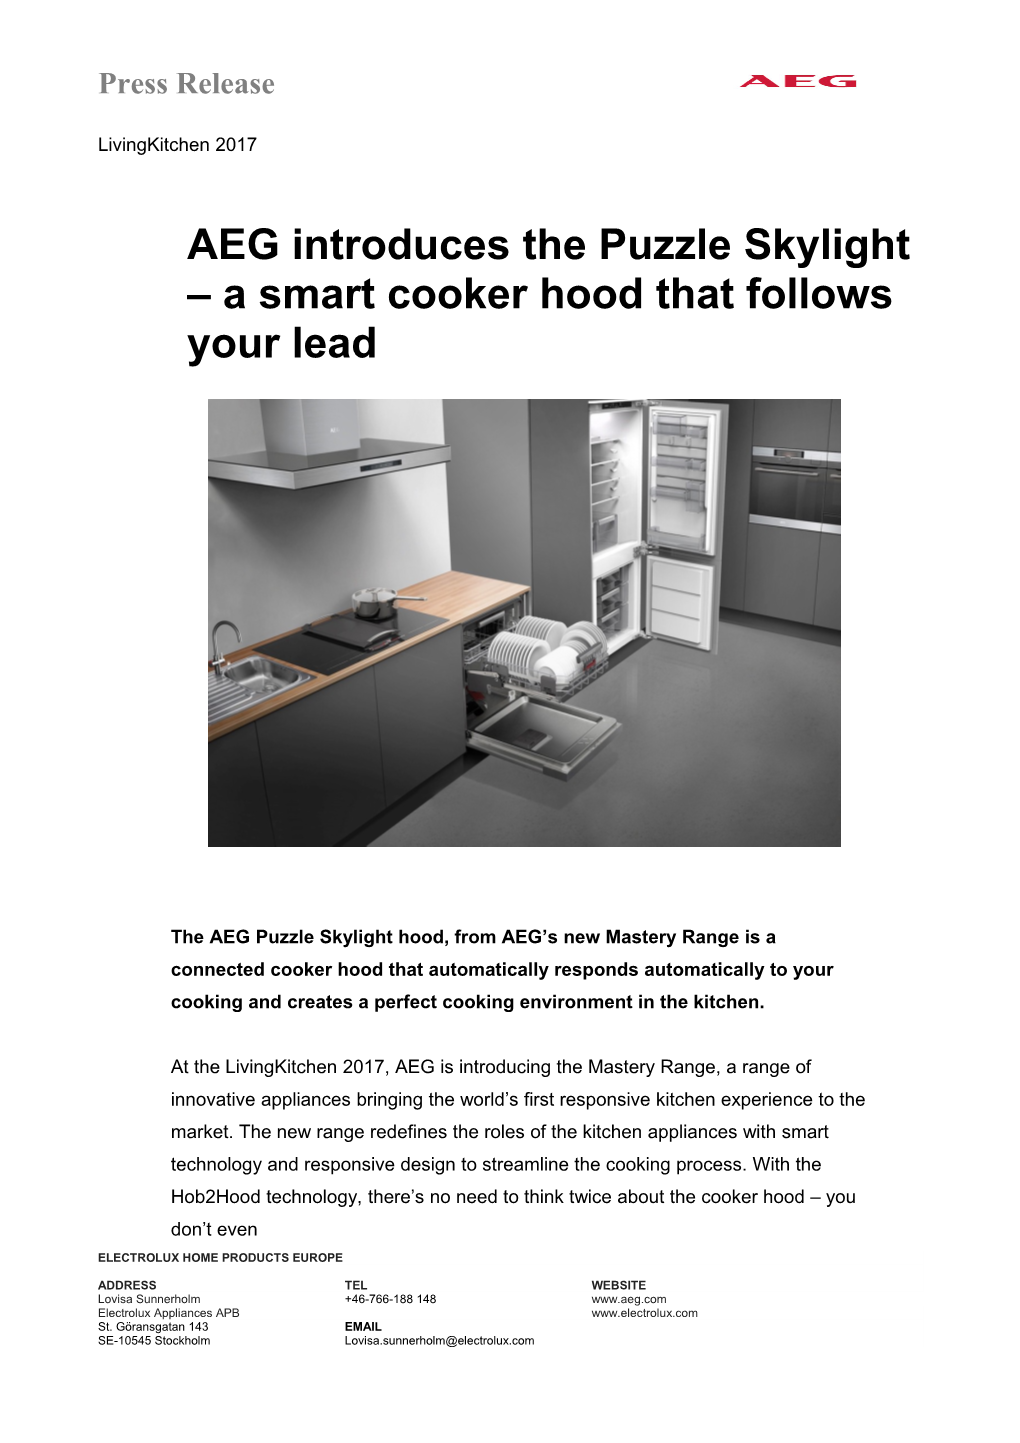 AEG Introduces the Puzzle Skylight a Smart Cooker Hood That Follows Your Lead